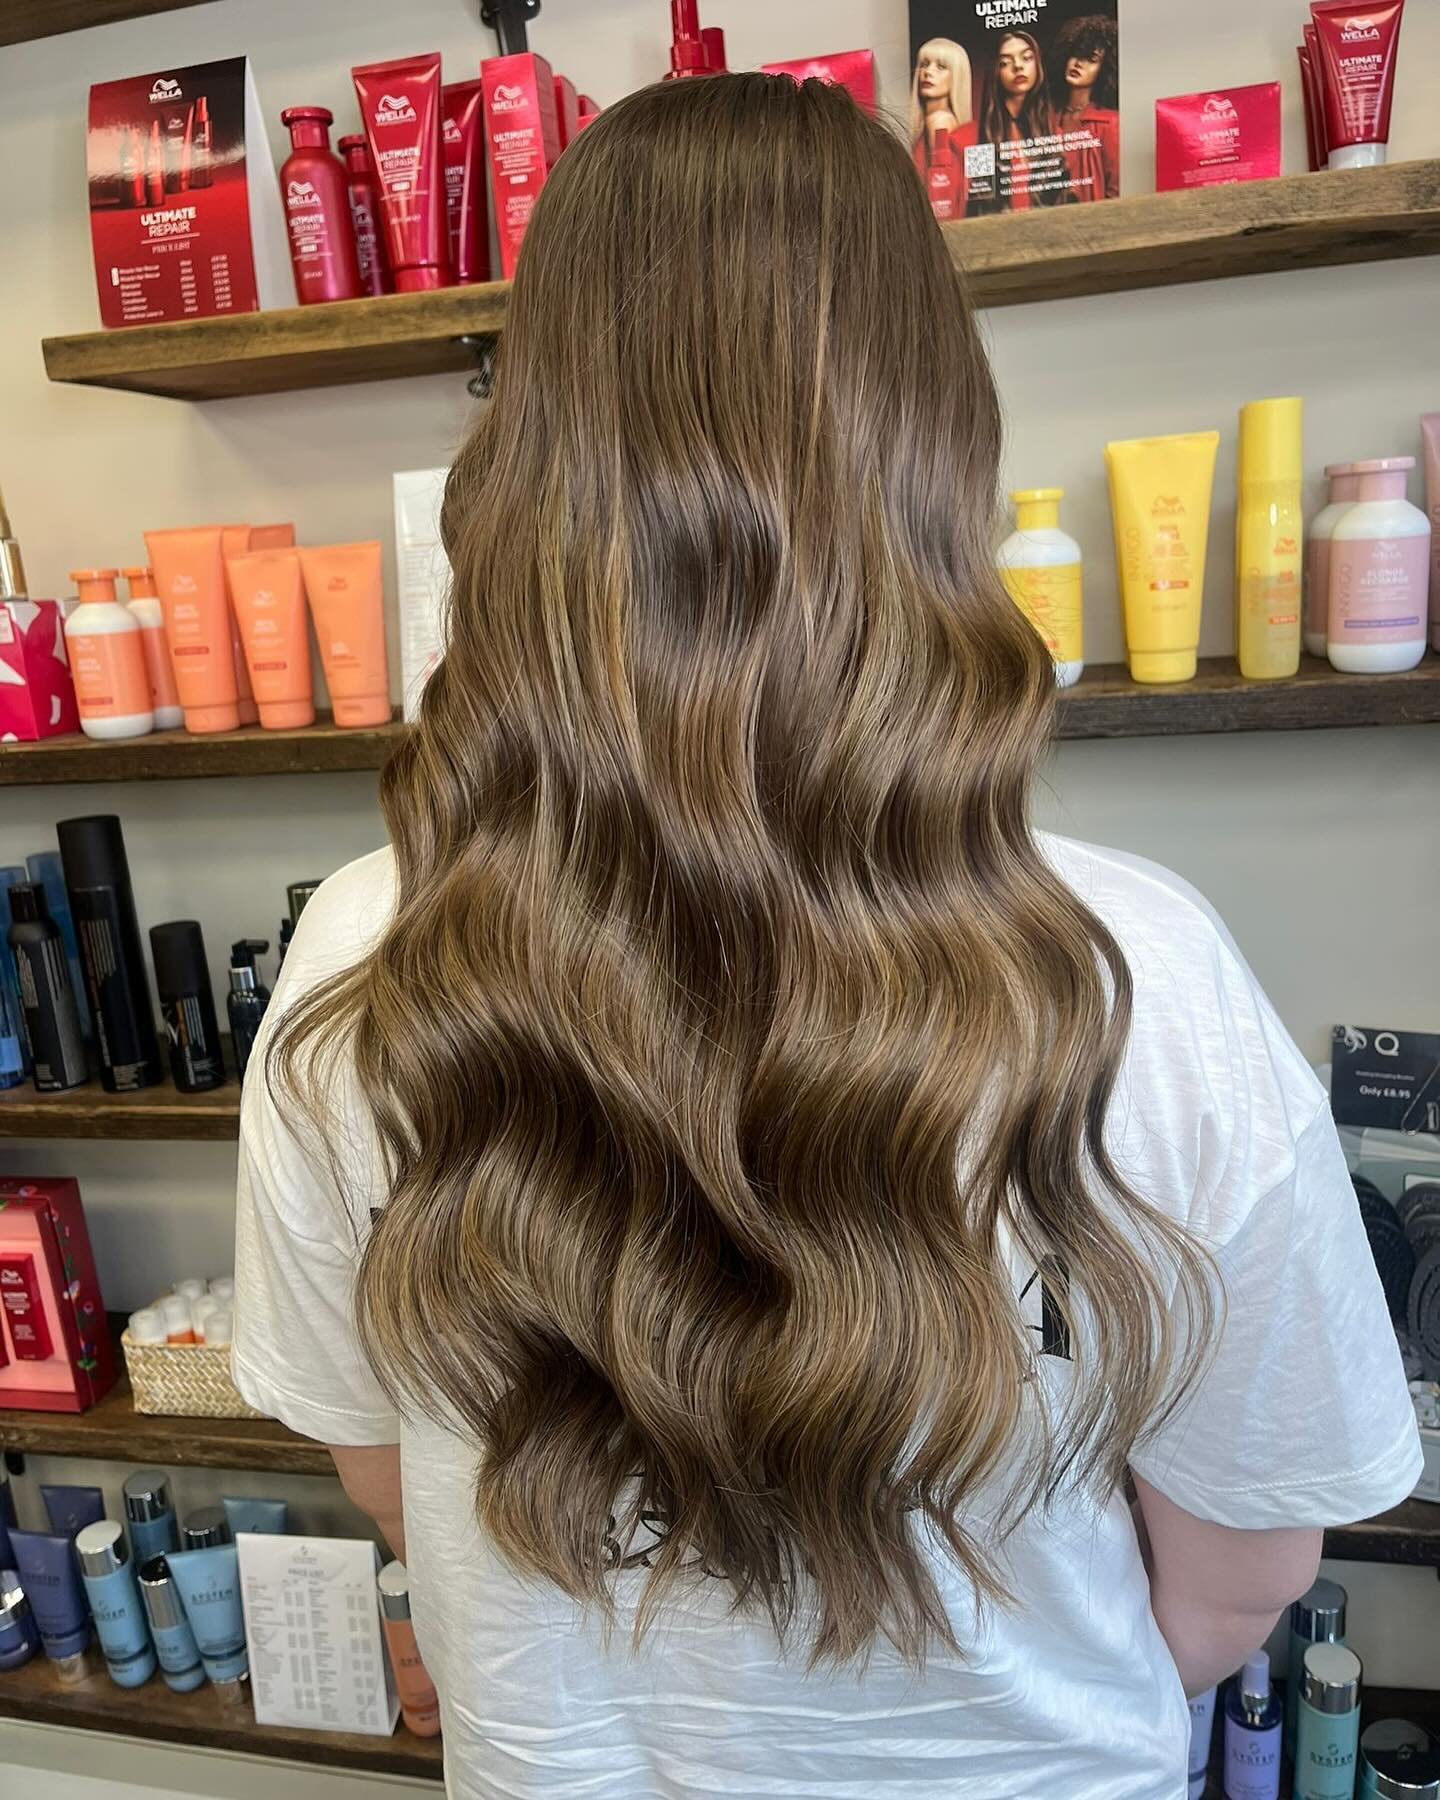 The most beautiful full head of nano extensions for this bride to be! ✨ 

Katy added 18inch of mixed shades to add thickness and length 👌🏻 
.
.
.
#hairextensionssurrey #hairextensions #nano #salon #surrey #easthorsley